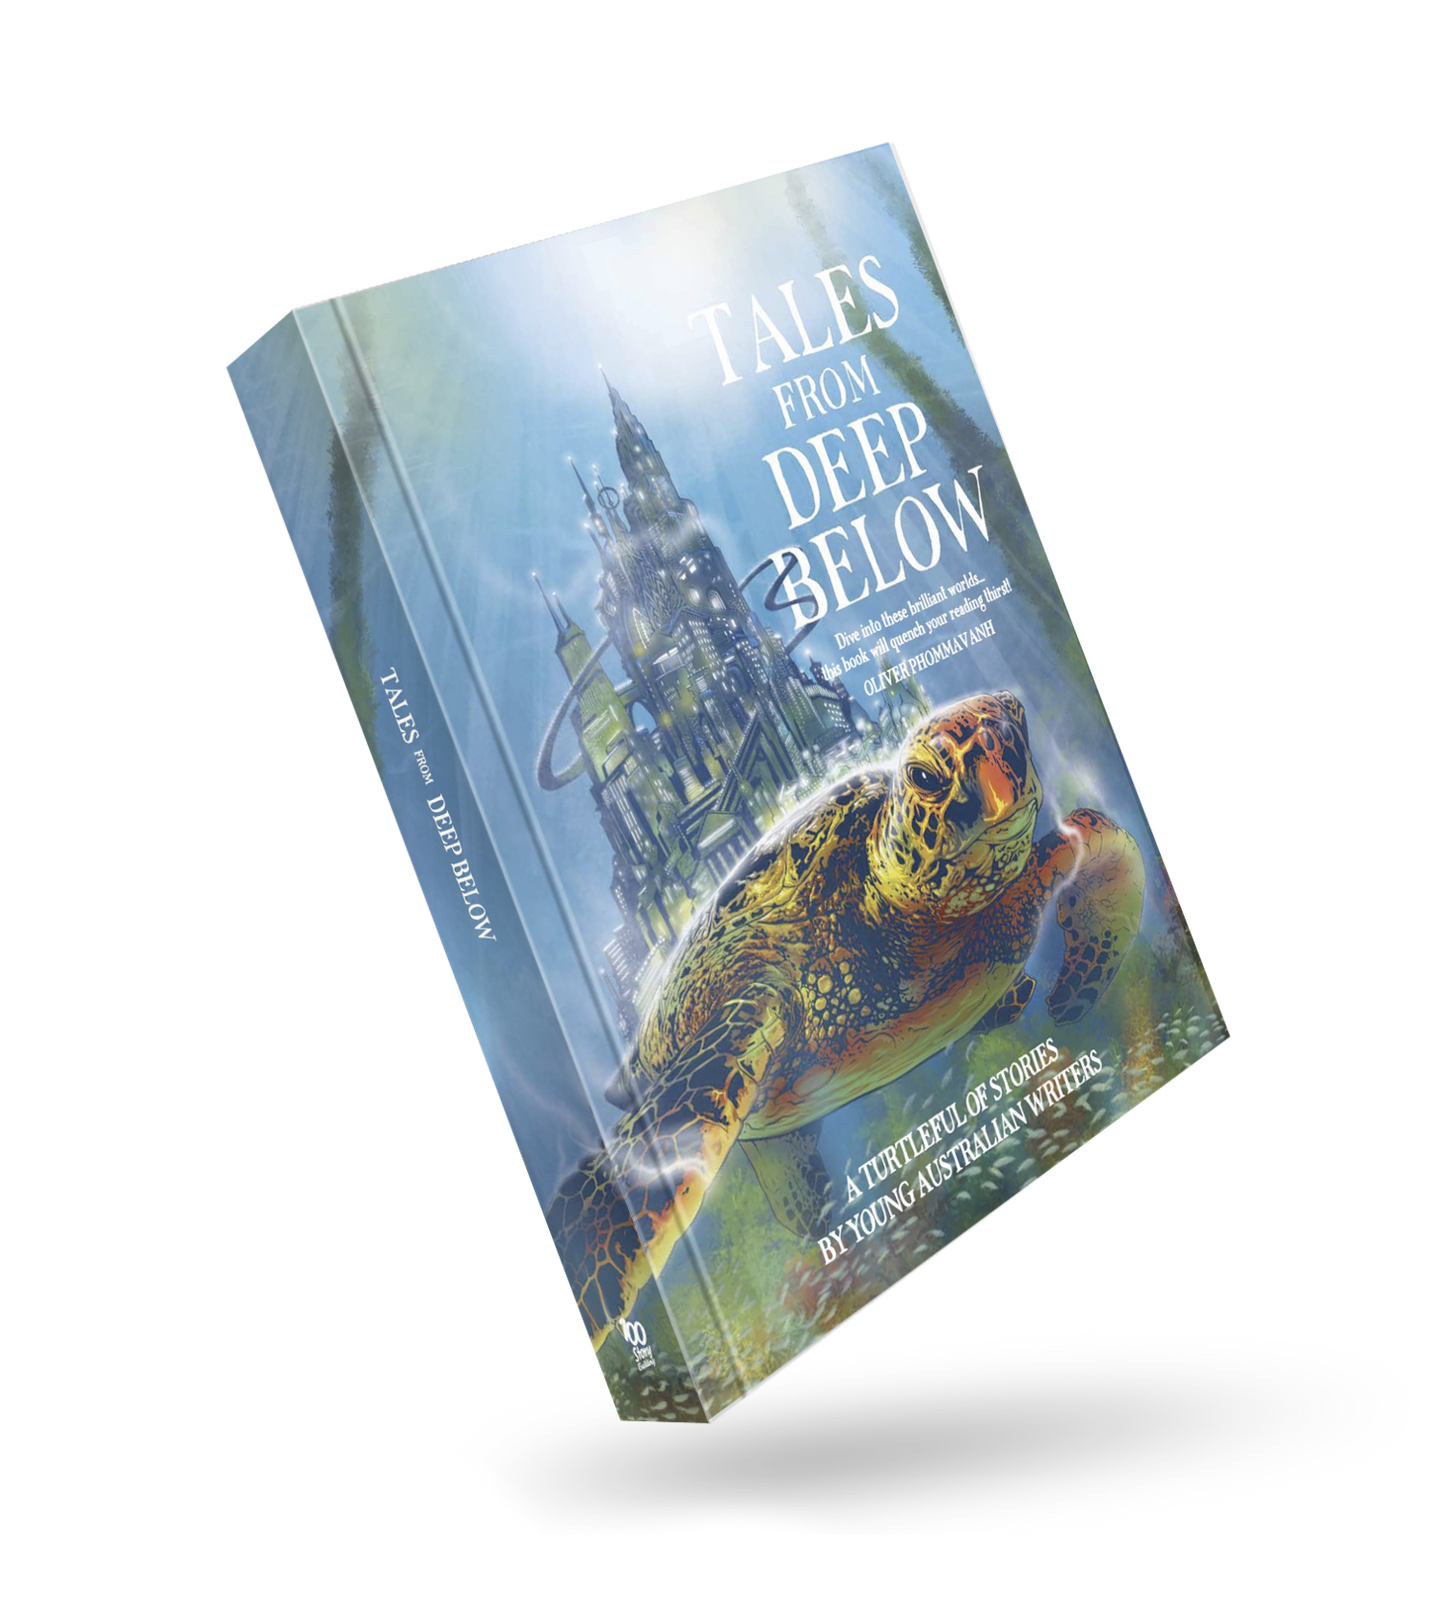 100 Story Building 'Tales from Deep Below' Book